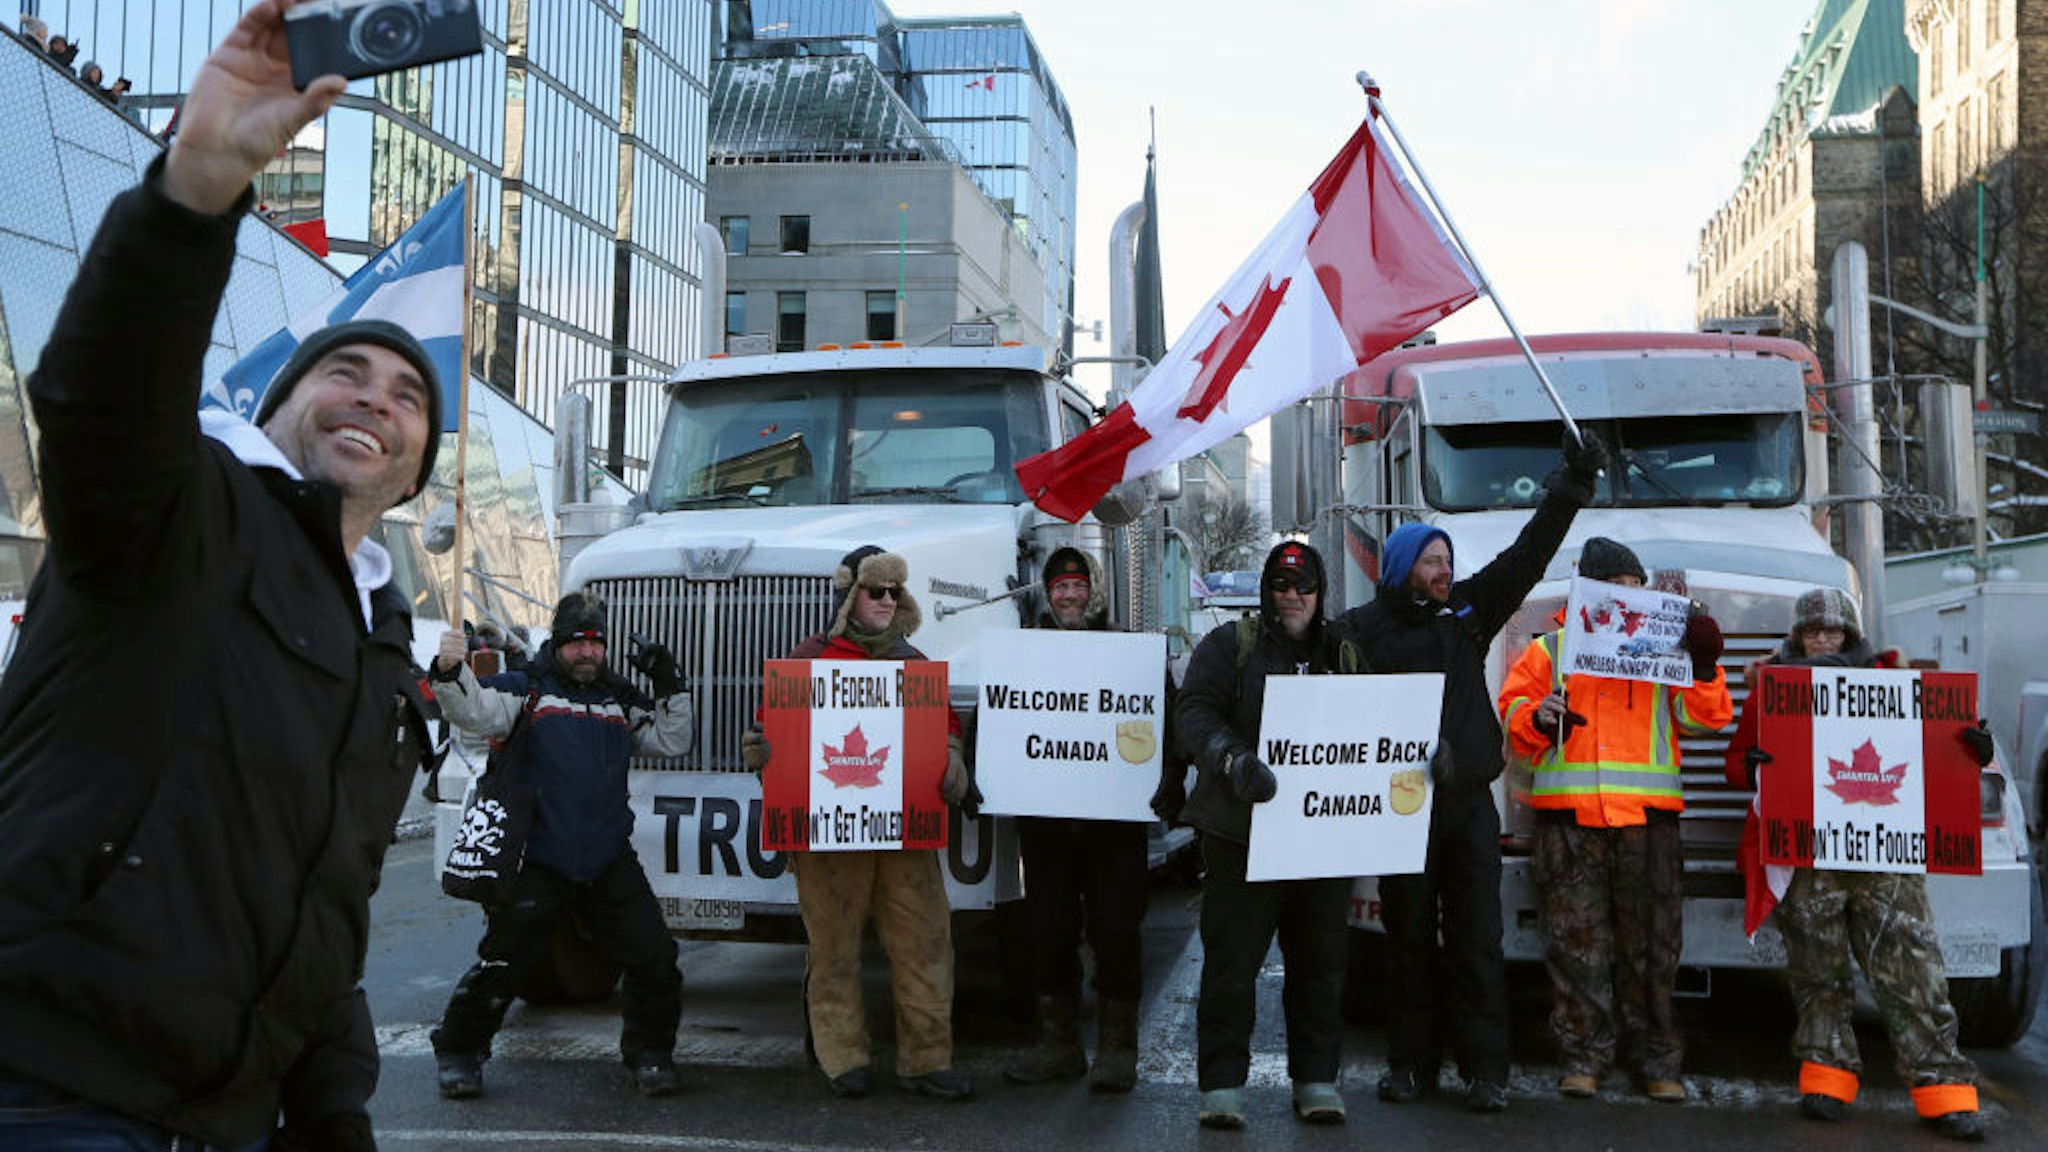 Demonstrators take photos with trucks parked on Wellington Street during a protest near Parliament Hill in Ottawa, Ontario, Canada, on Saturday, Jan. 29, 2022. A convoy of truckers and others who oppose vaccine mandates began rolling into Ottawa on Friday, putting Canada's capital city on edge amid warnings from police that they dont know how large the protests will get. Photographer: David Kawai/Bloomberg via Getty Images